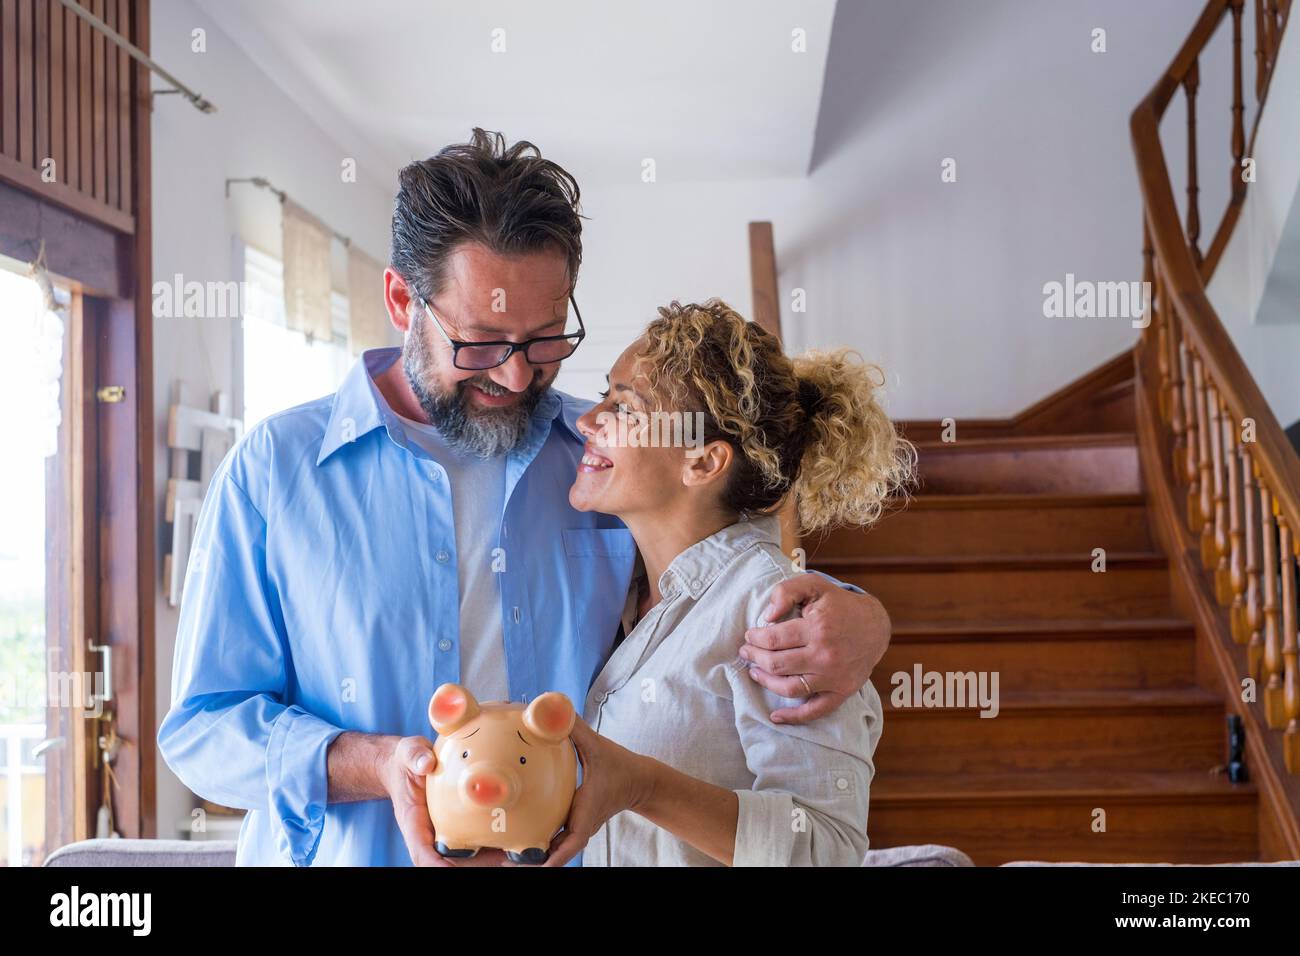 Happy caucasian couple holding piggy bank to save money to make their future dreams come true. Loving man and woman embracing each other while holding piggy bank for savings at home Stock Photo